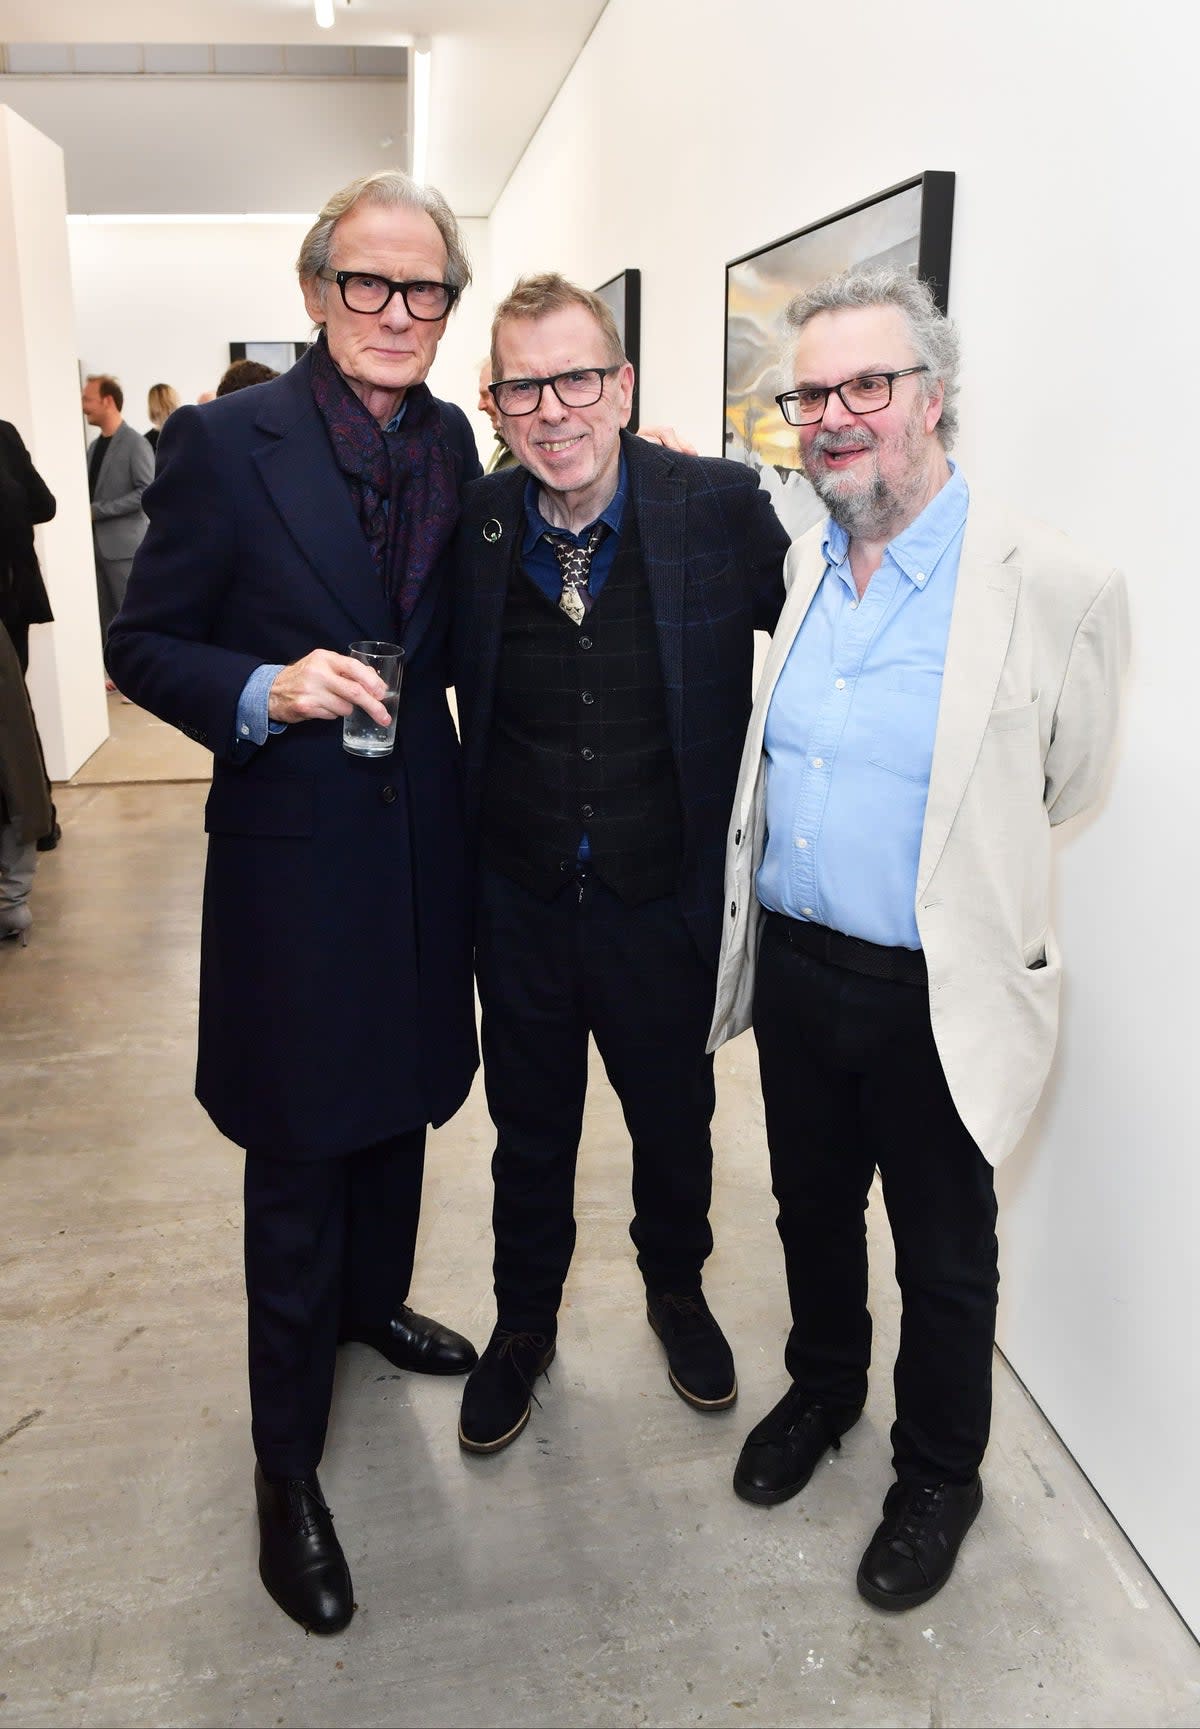 Billy Nighy, Timothy Spall and Stephen Poliakoff (Jed Cullen/Dave Benett/Getty Images)